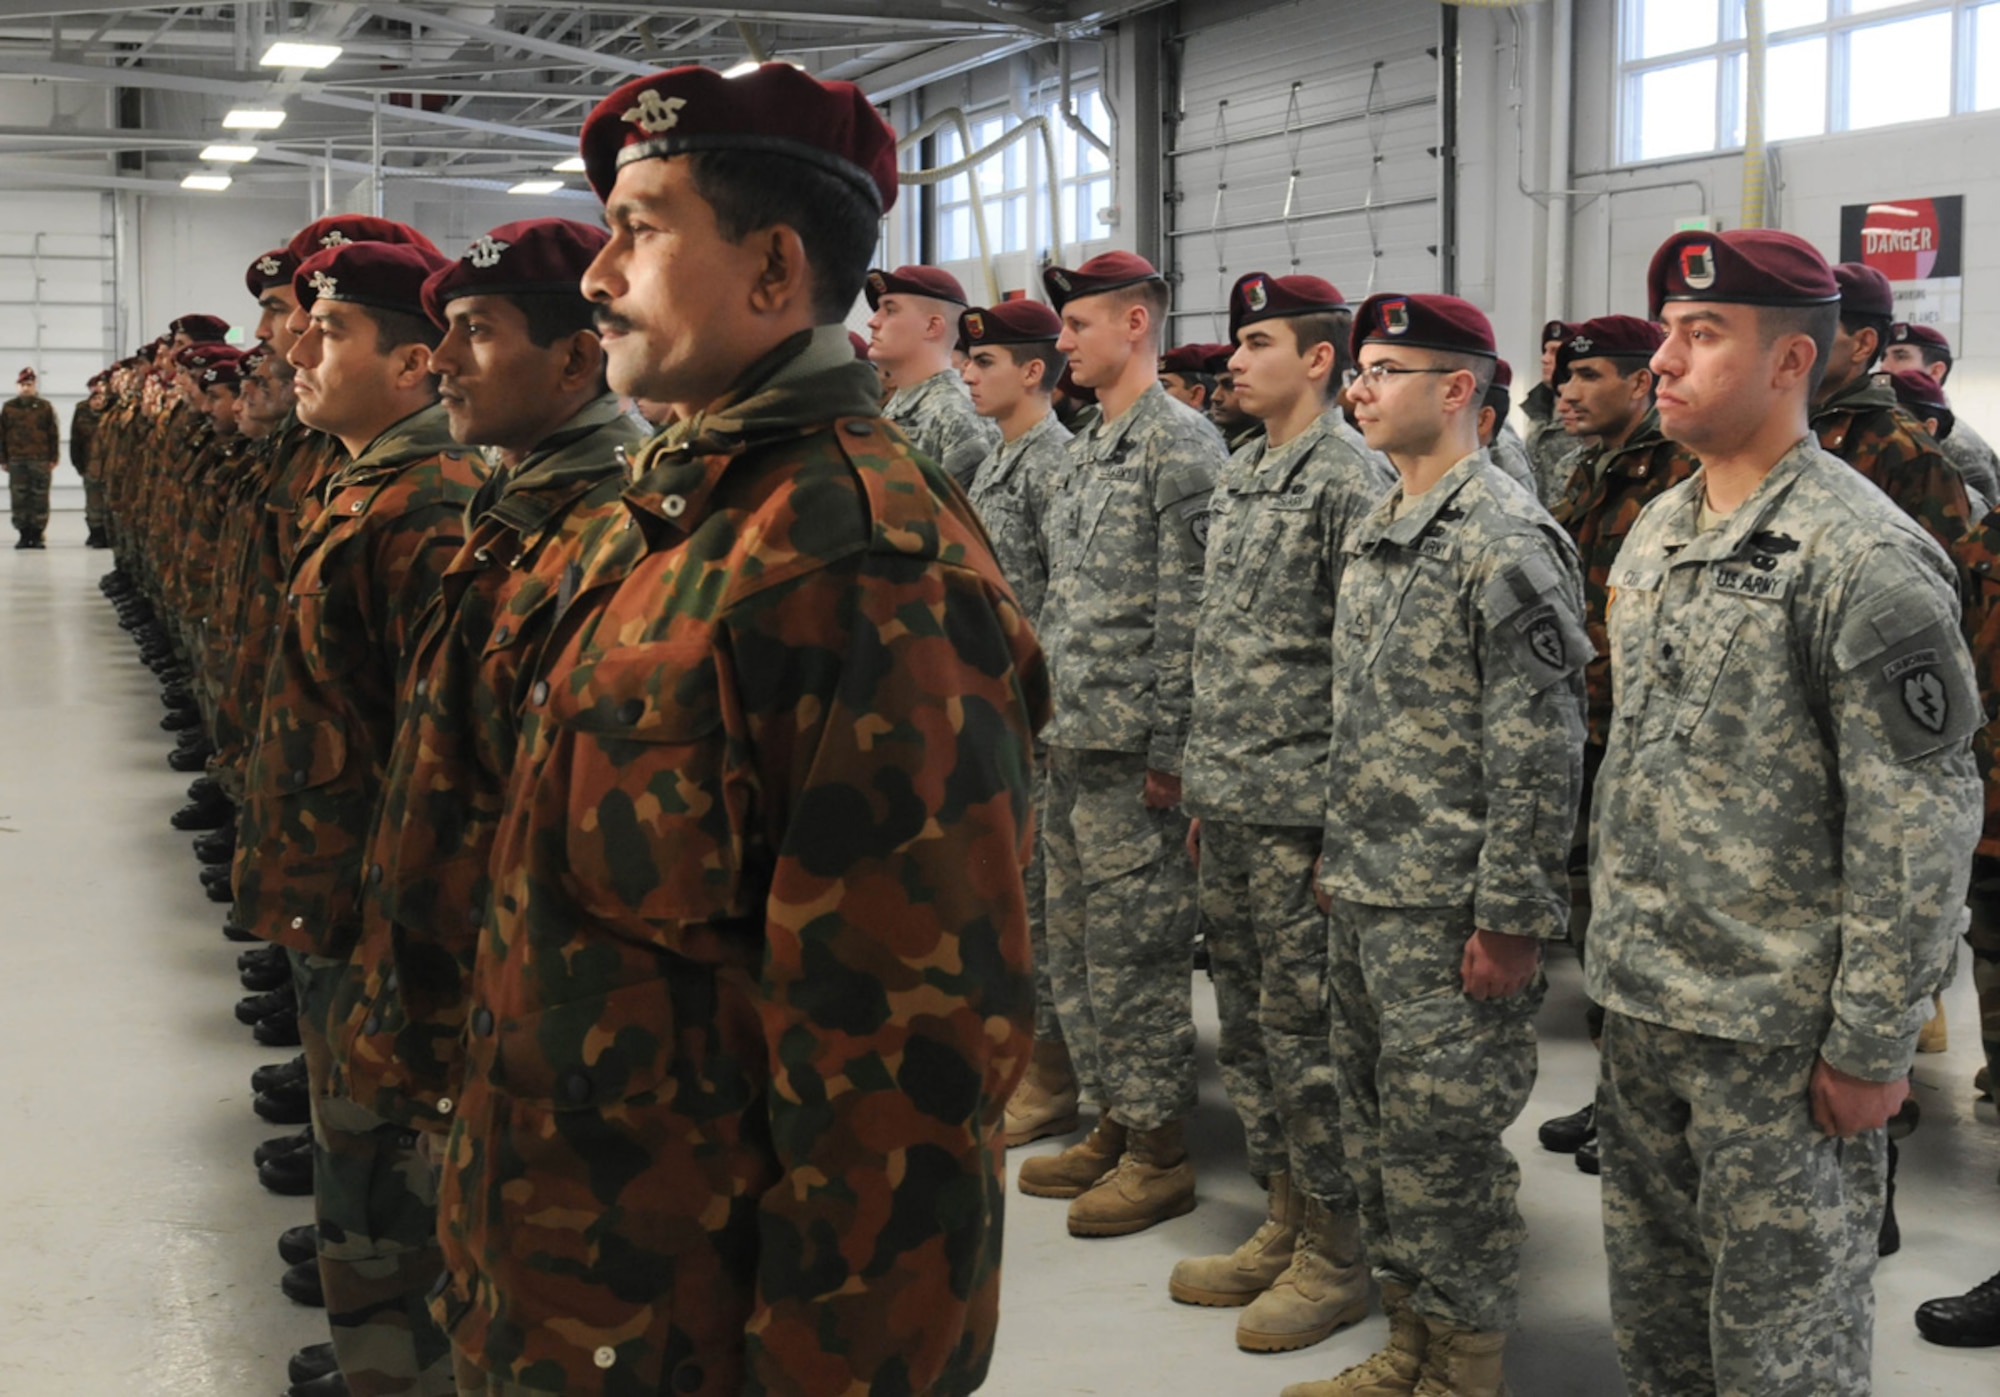 Soldiers of U.S. Army Alaska and the Indian army stand ready to receive foreign airborne jump wings during a wing exchange ceremony Nov. 13 at Joint Base Elmendorf-Richardson, Alaska. The Soldiers earned their foreign jump wings Nov. 10 when they conducted a combined jump during exercise Yudh Abhyas 2010. (U.S. Army photo/Spc. Ashley Armstrong)